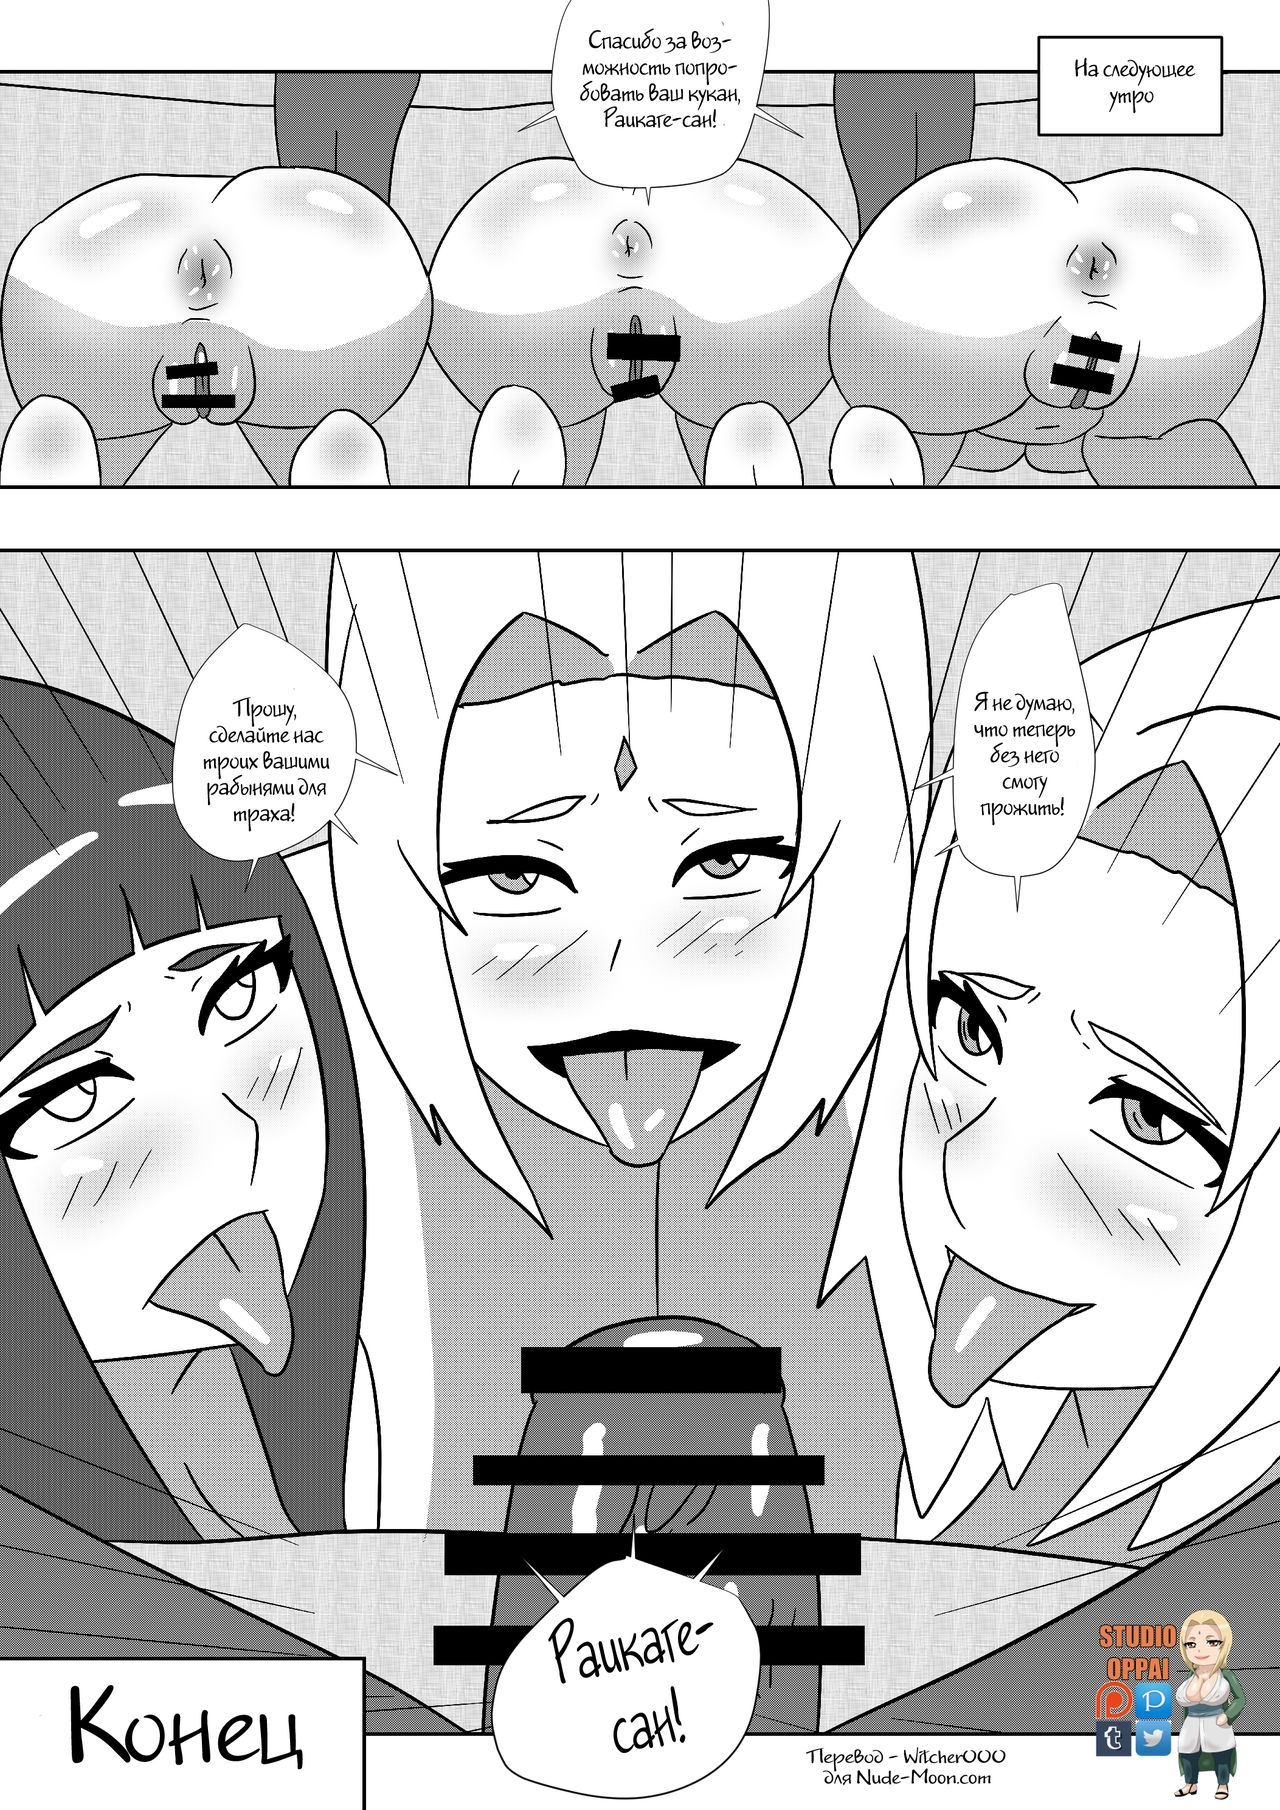 [Studio Oppai] Negotiations with Raikage (Naruto) [Russian] [Witcher000] 10